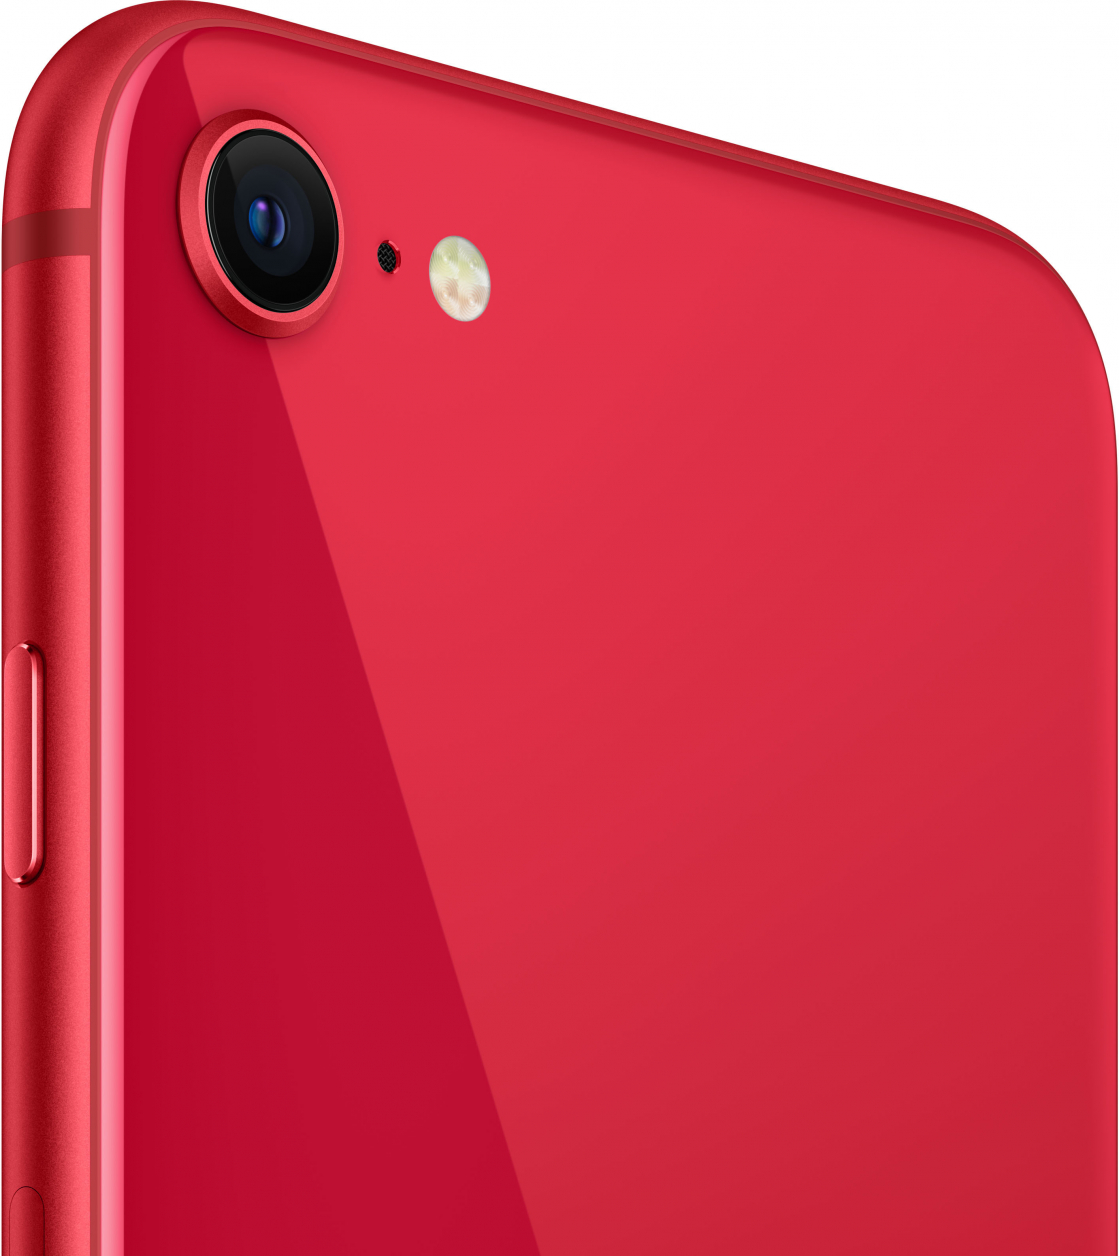 Apple iPhone SE (2020) 256GB (PRODUCT) RED